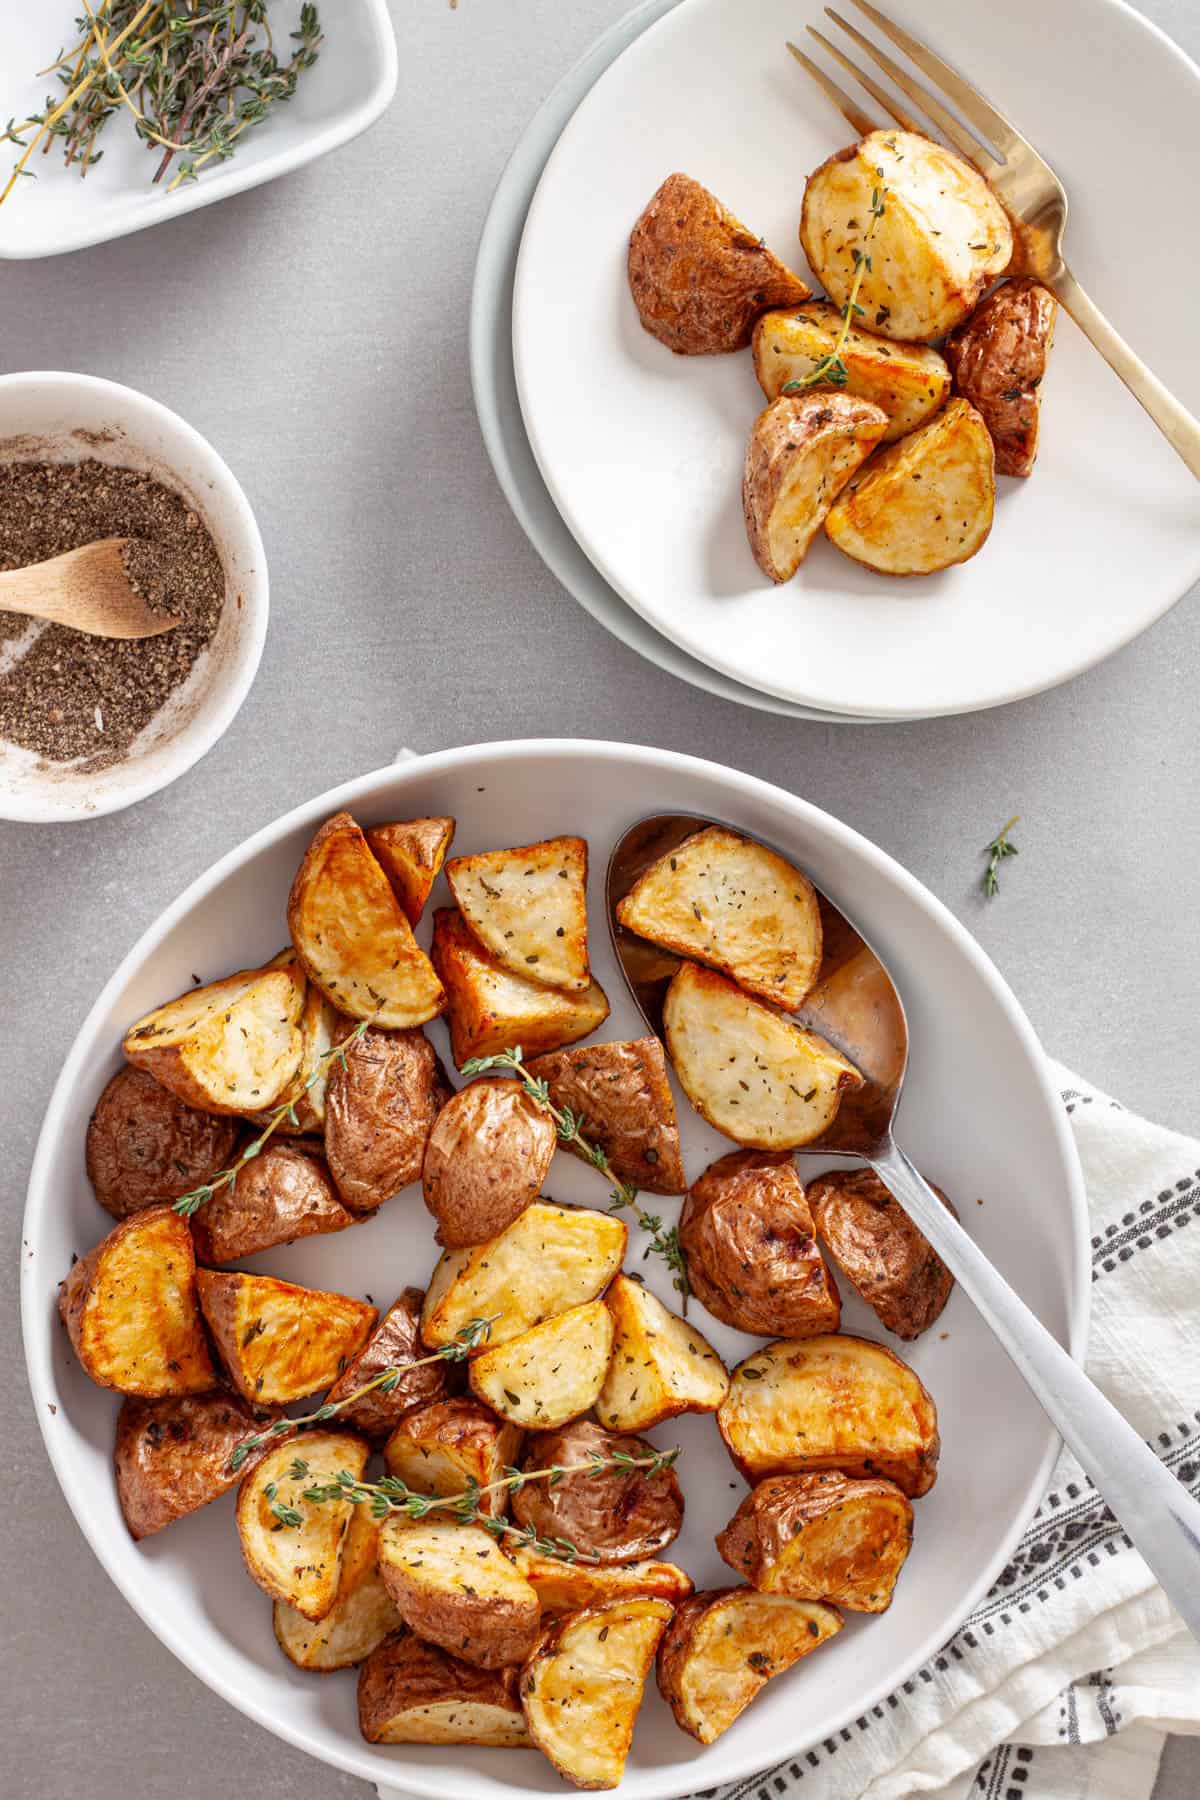 A bowl of crispy air fried red potatoes with a small plate of more potatoes to the side.